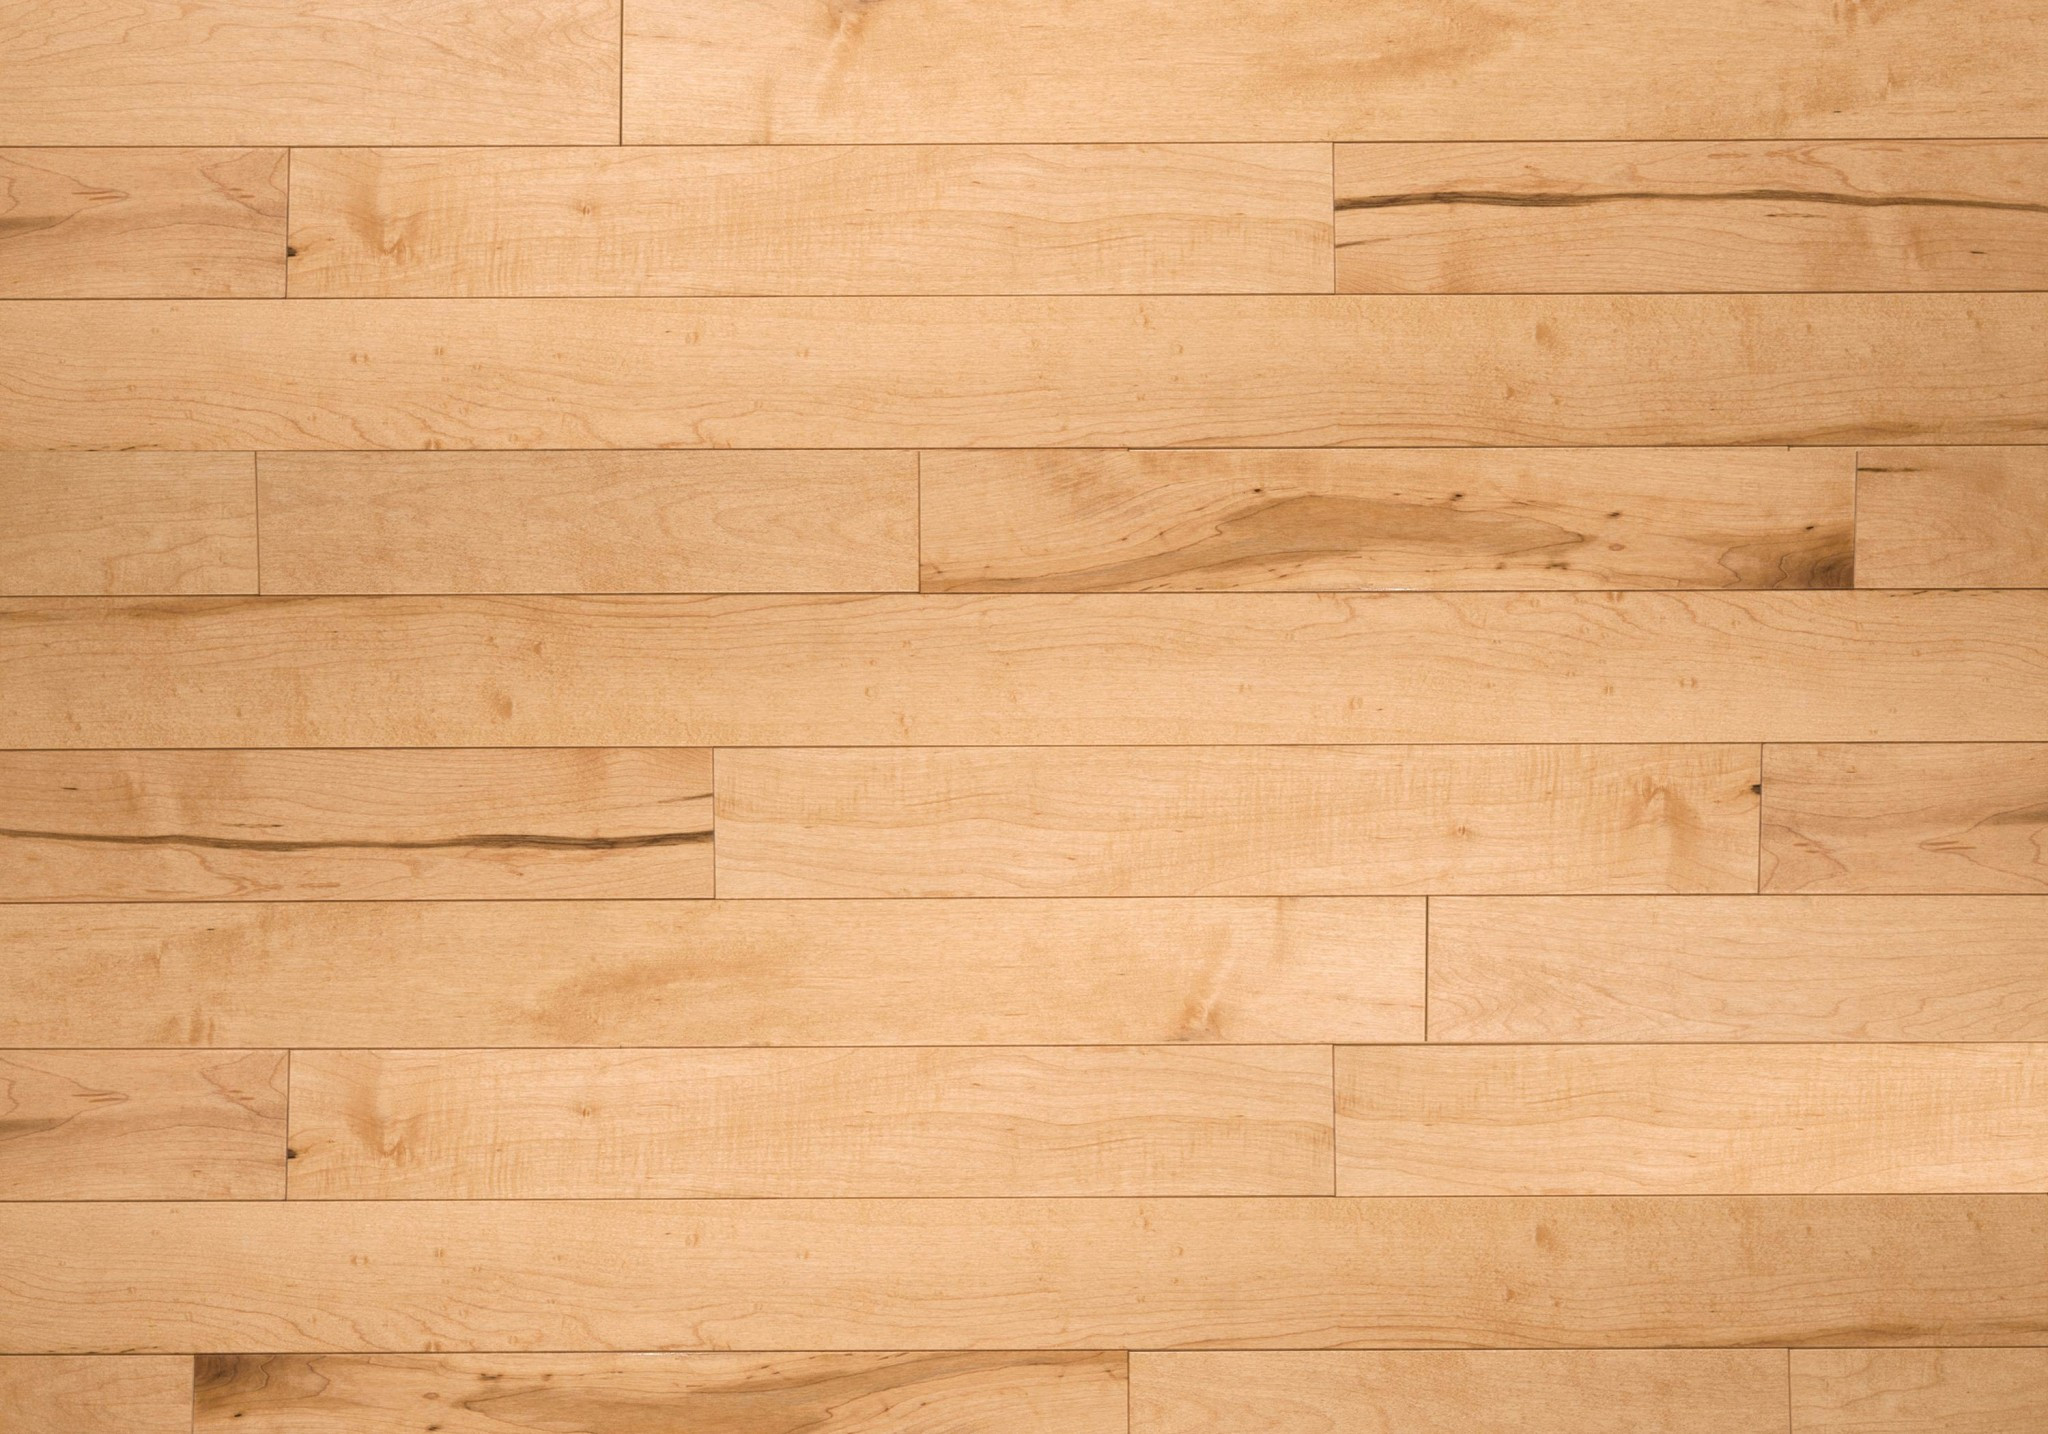 hardwood flooring prices home depot of breathtaking hardwood flooring beautiful floors are here only with breathtaking hardwood flooring calypso ambiance hard maple exclusive lauzon hickory cost near me toronto lowe home